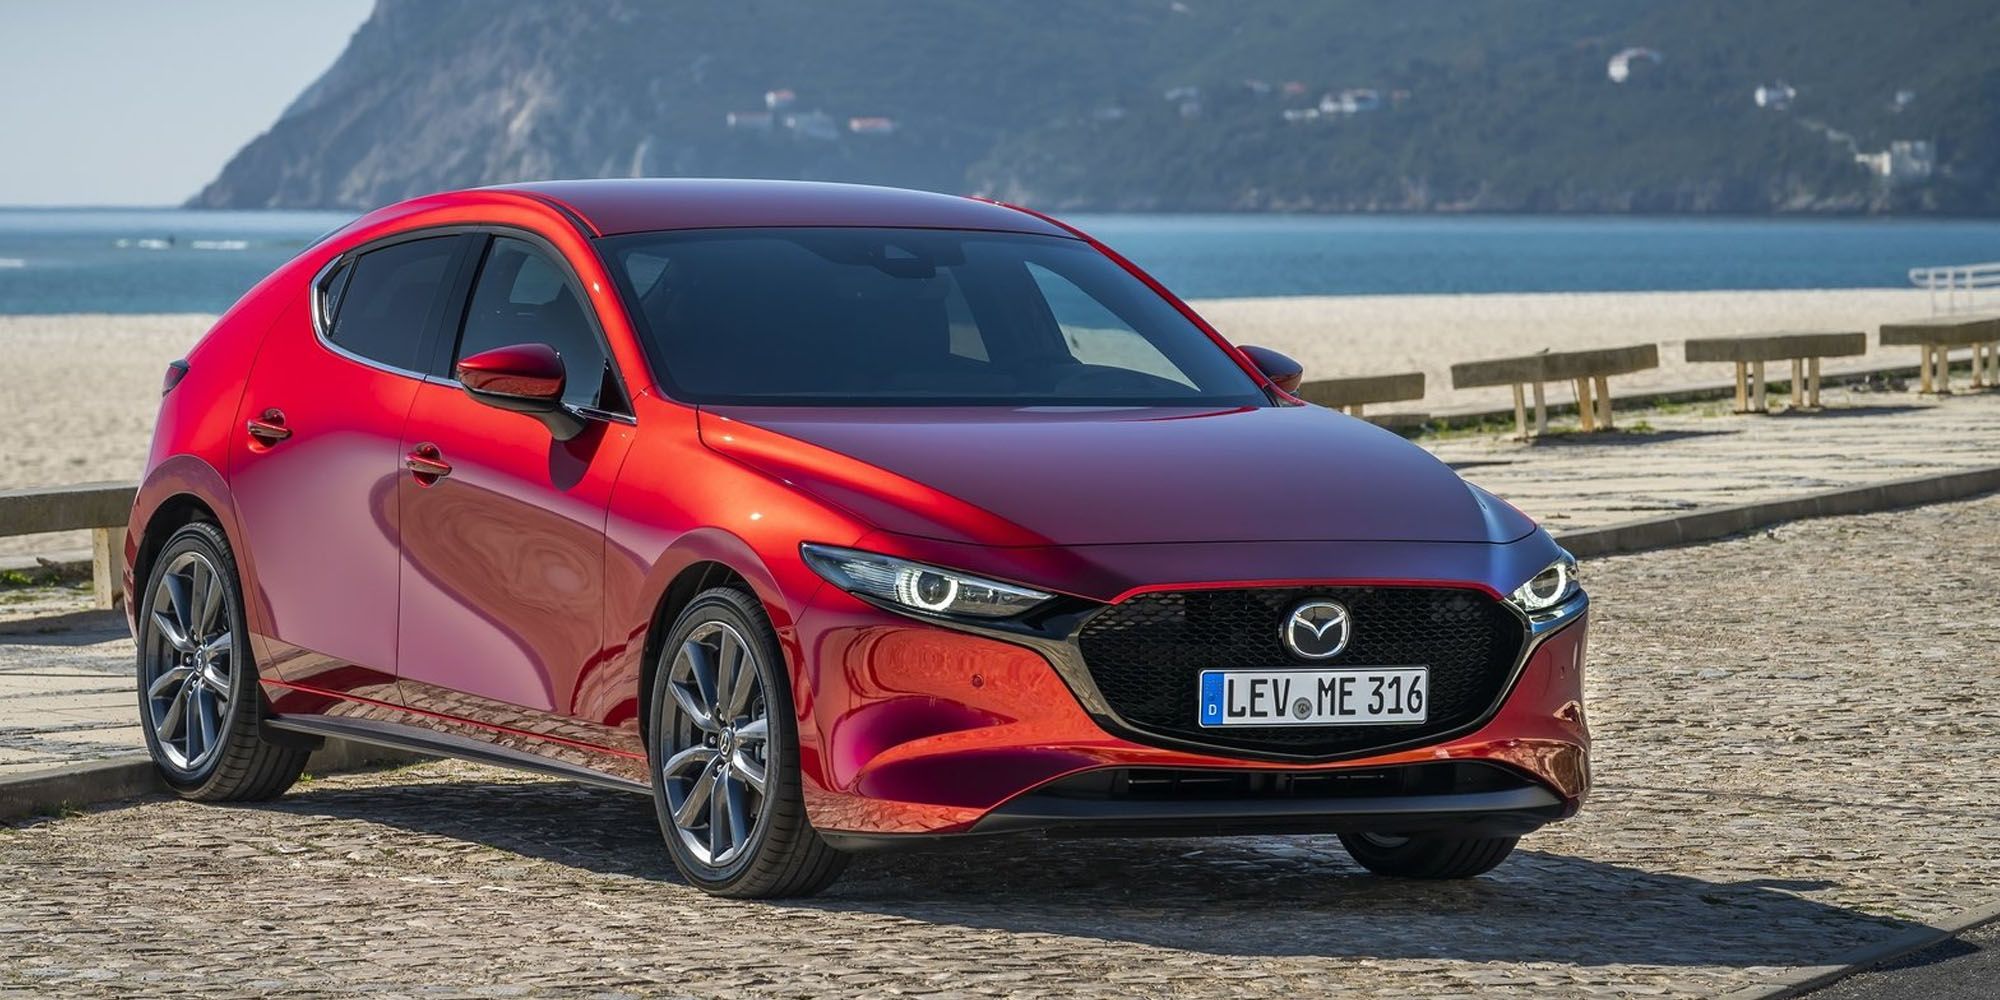 The front of a red Mazda 3